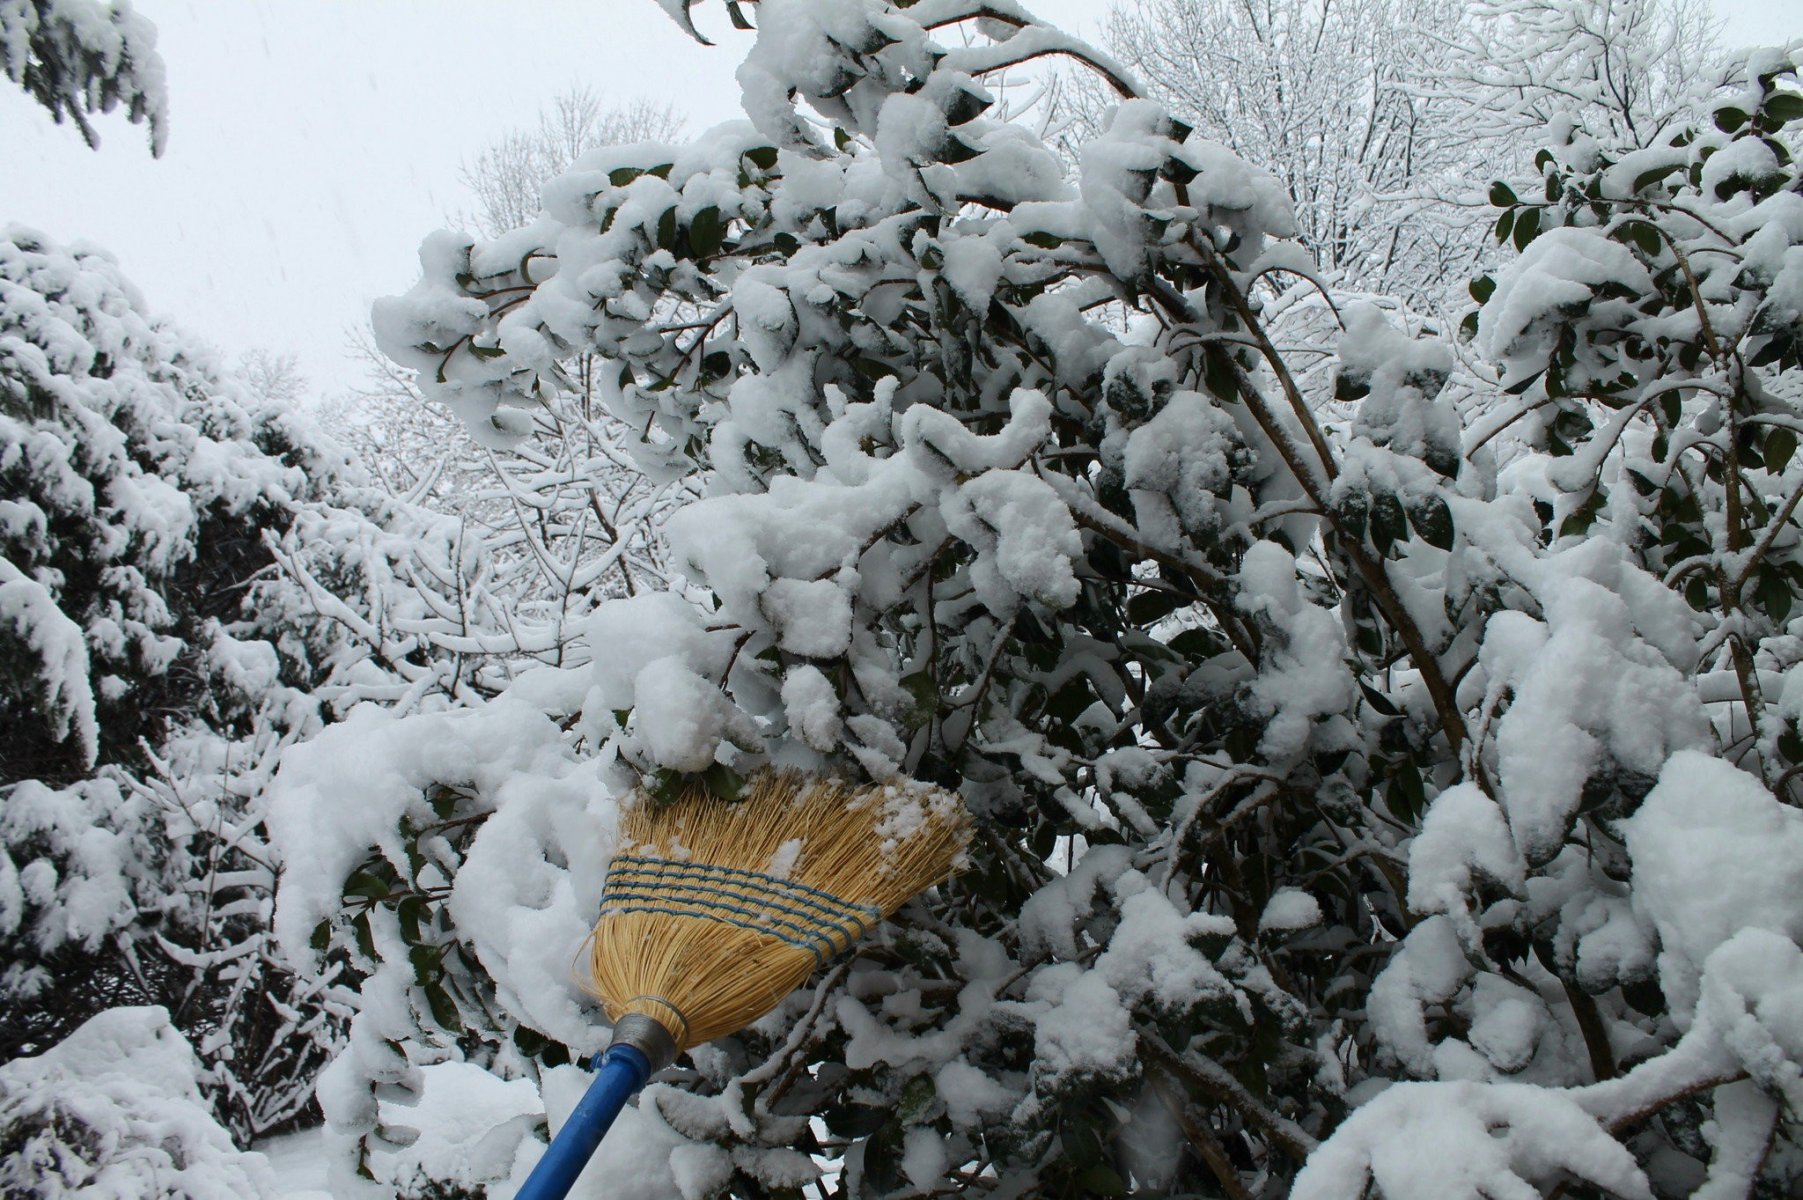 Using a straw broom to remove snow